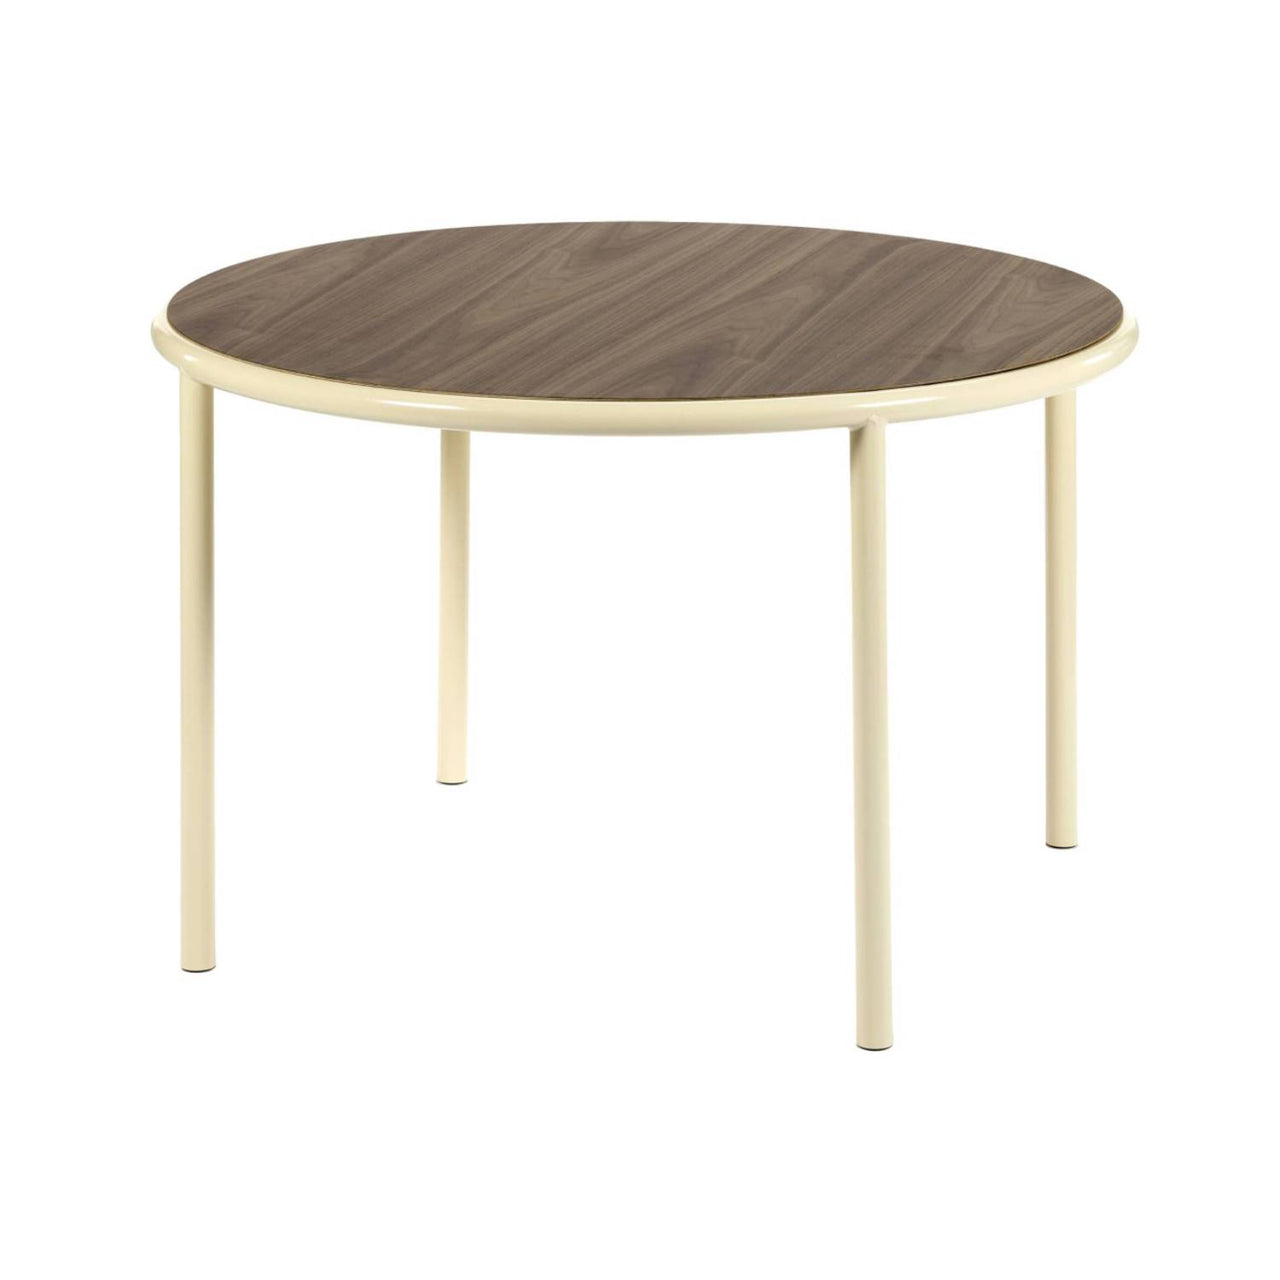 Wooden Table Round: Small - 47.2